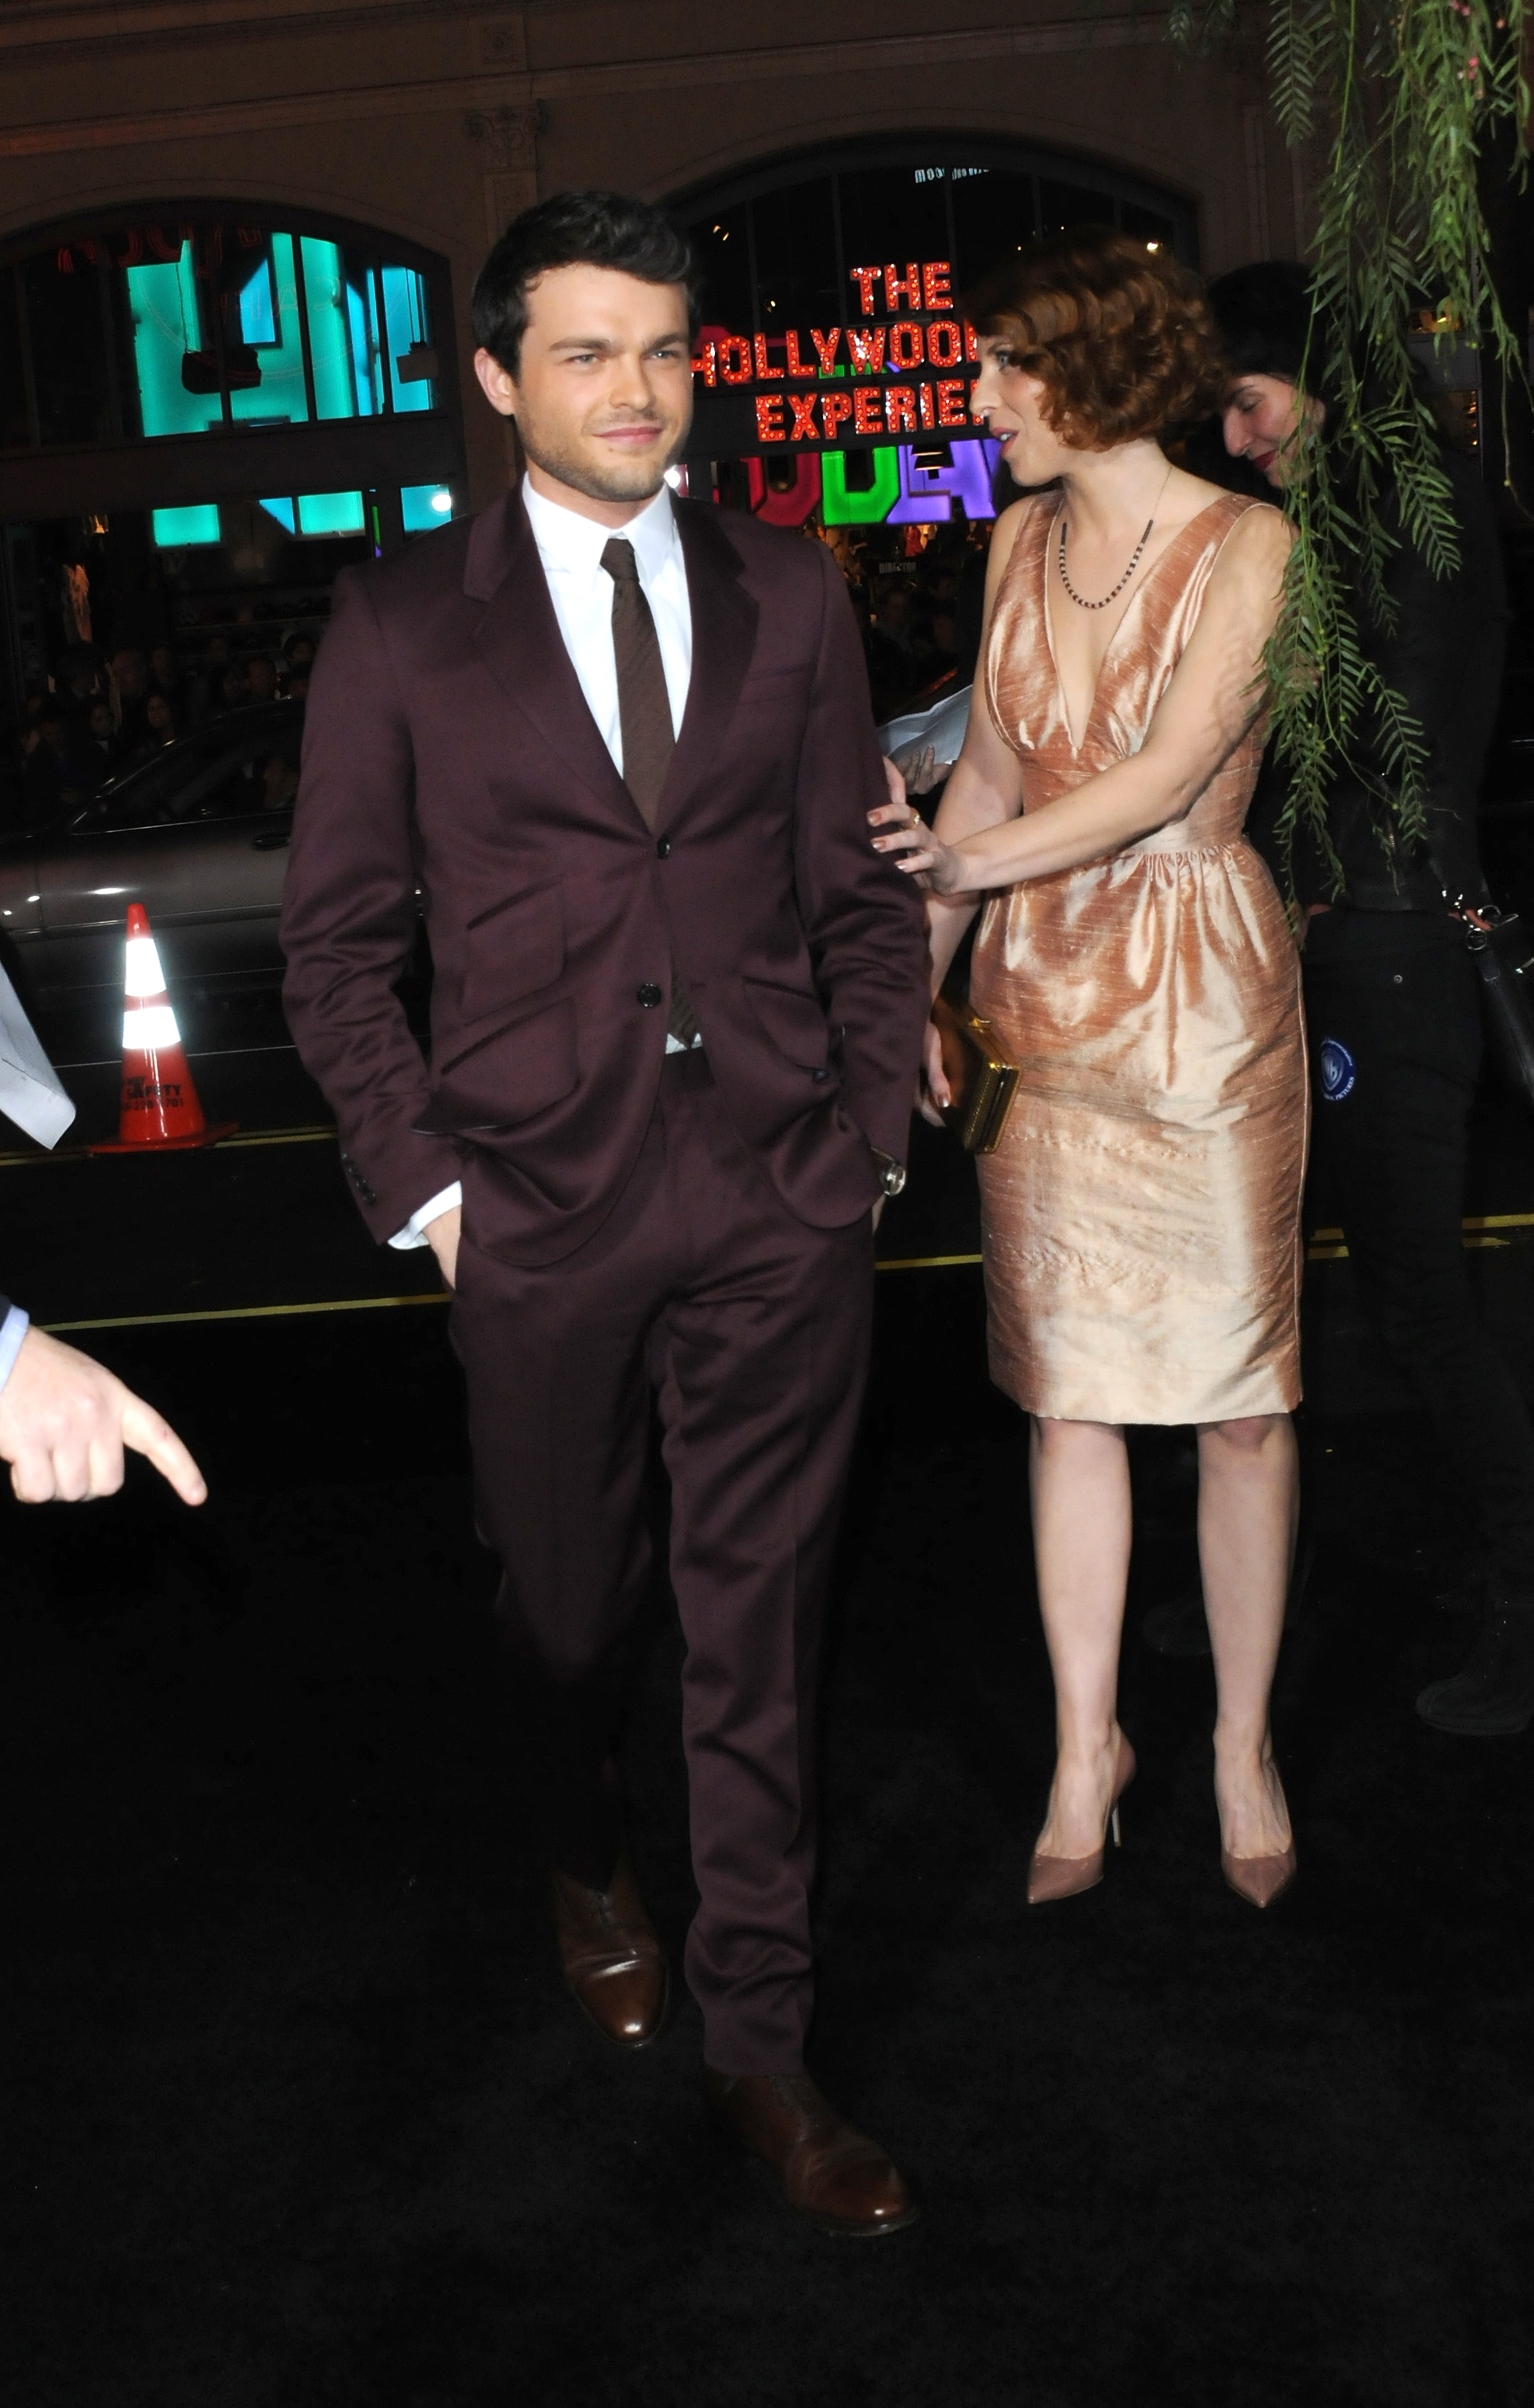 Alden Ehrenreich and Kelsey McNamee arrive for the Warner Bros. Pictures premiere "Beautiful Creatures" held at TCL Chinese Theater on February 6, 2013, in Hollywood, California. | Source: Getty Images